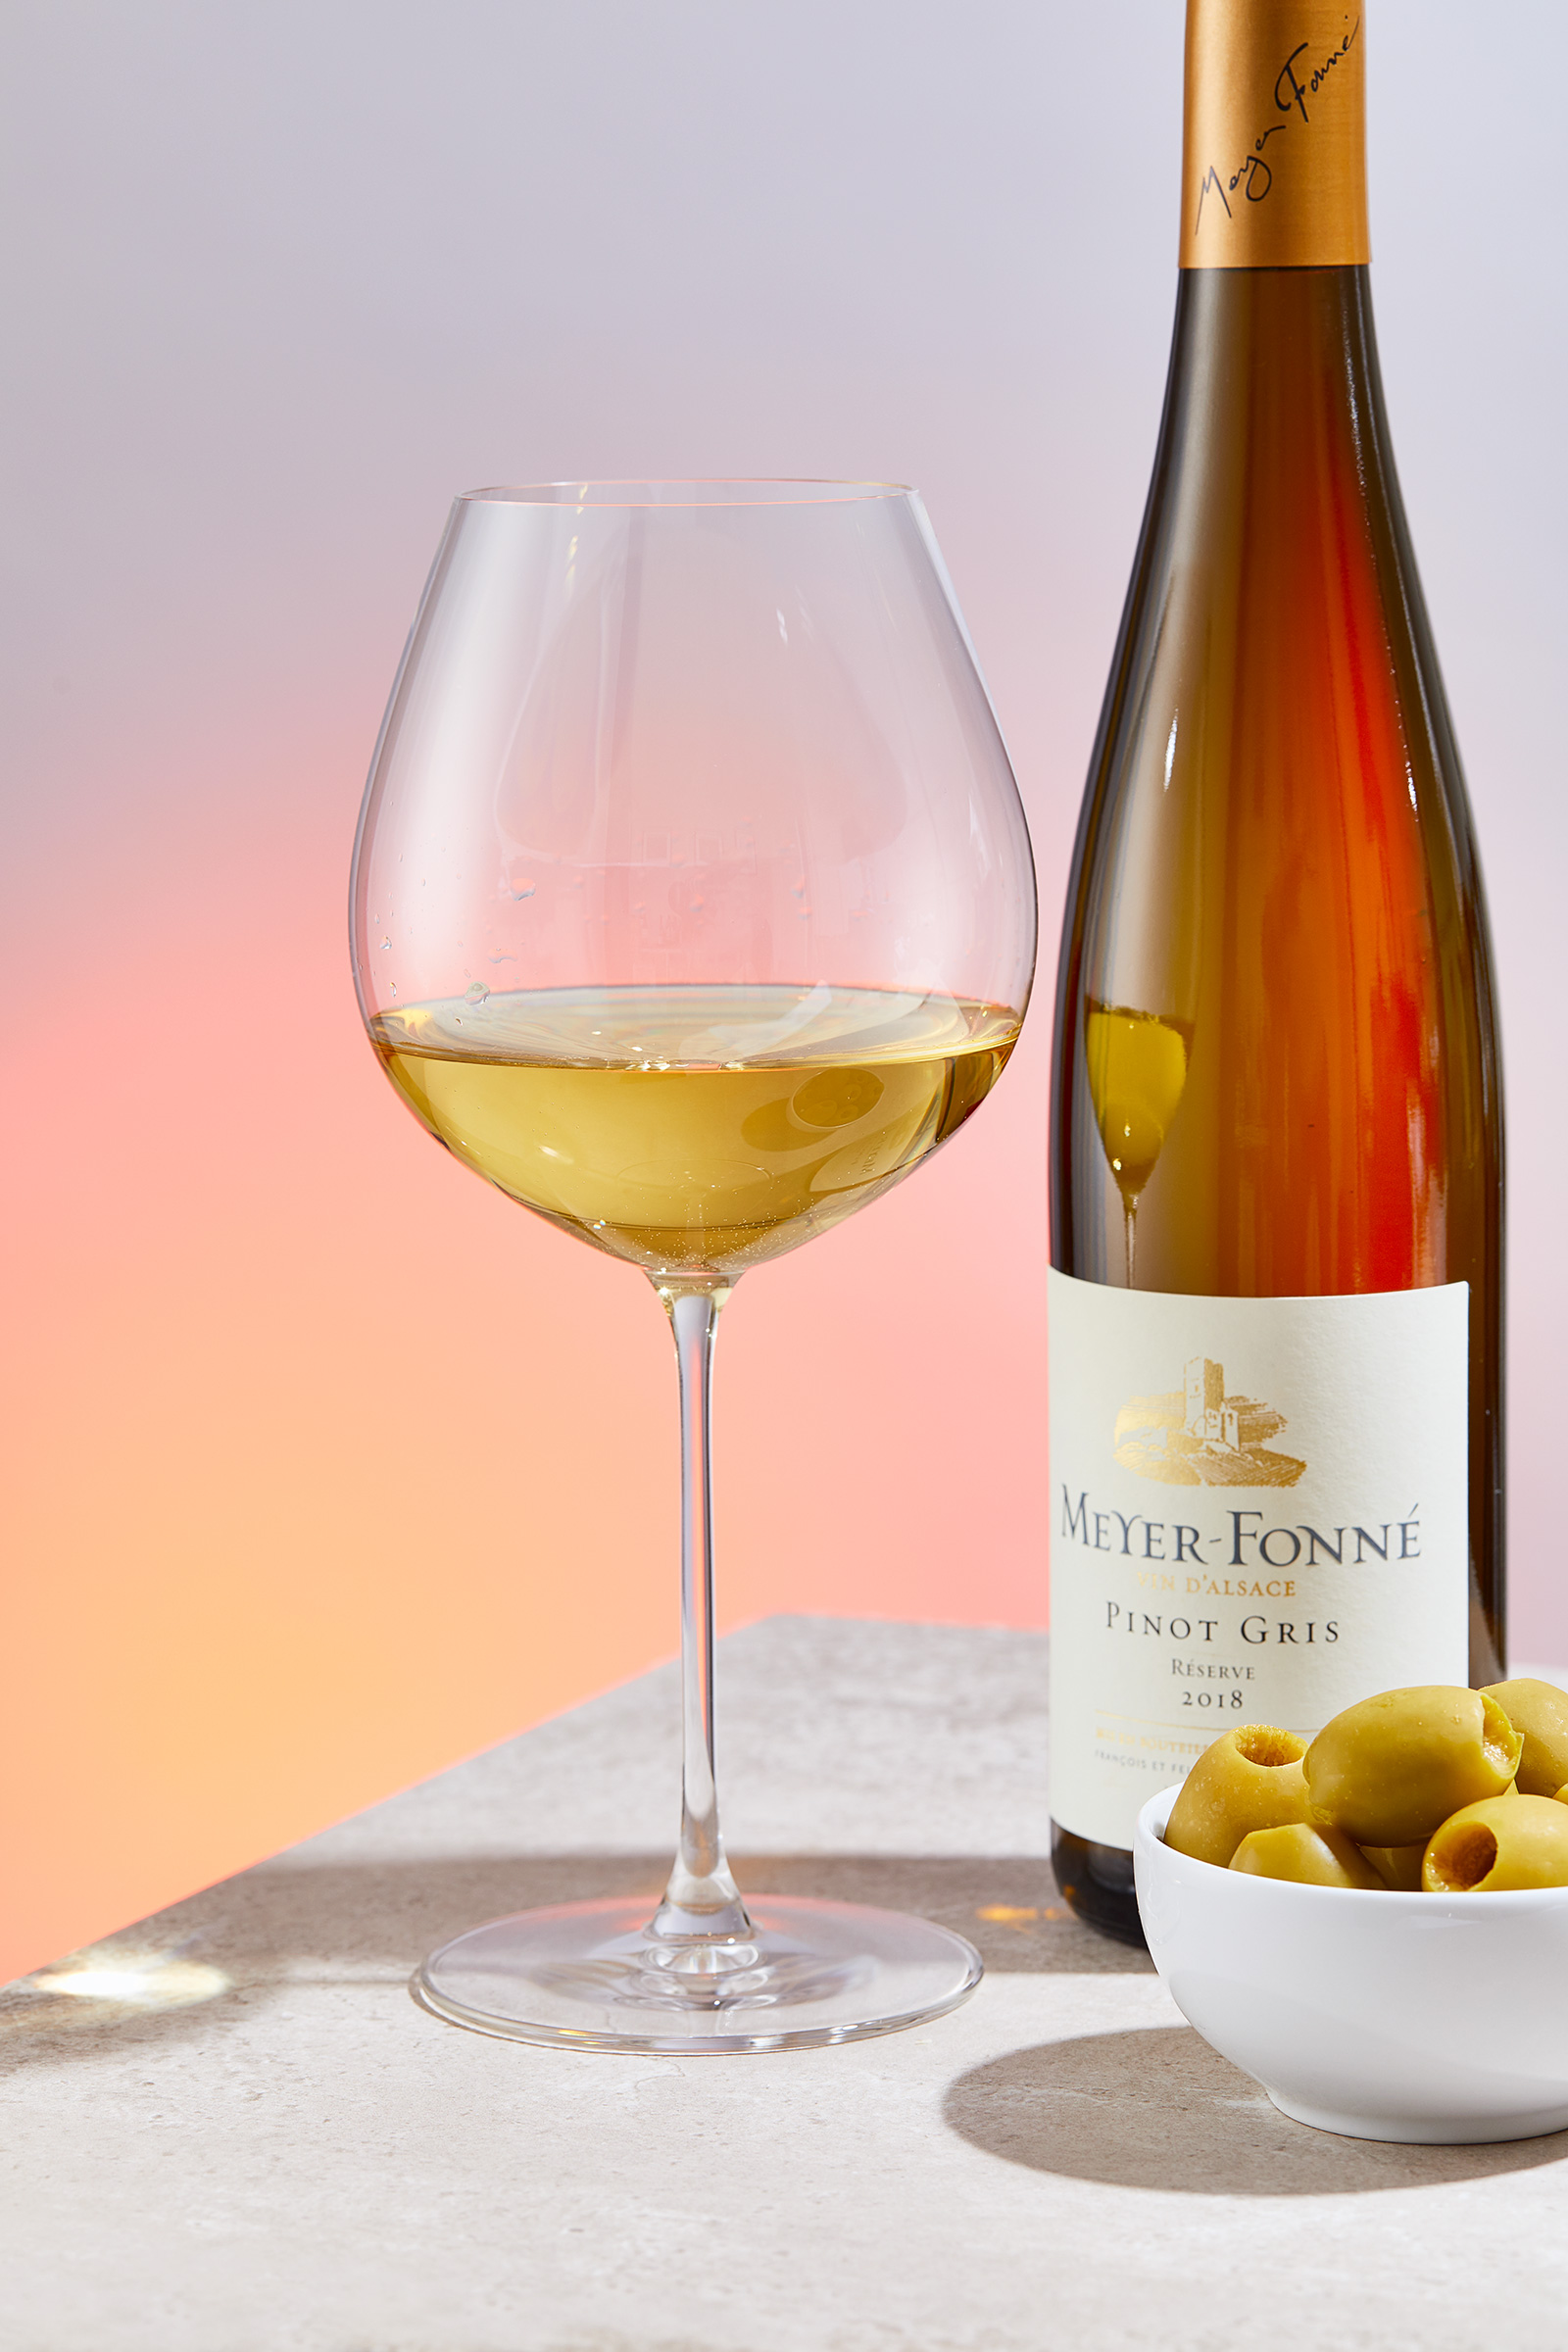 Meyer Fonne Pinot Gris Bottle, glass and olives